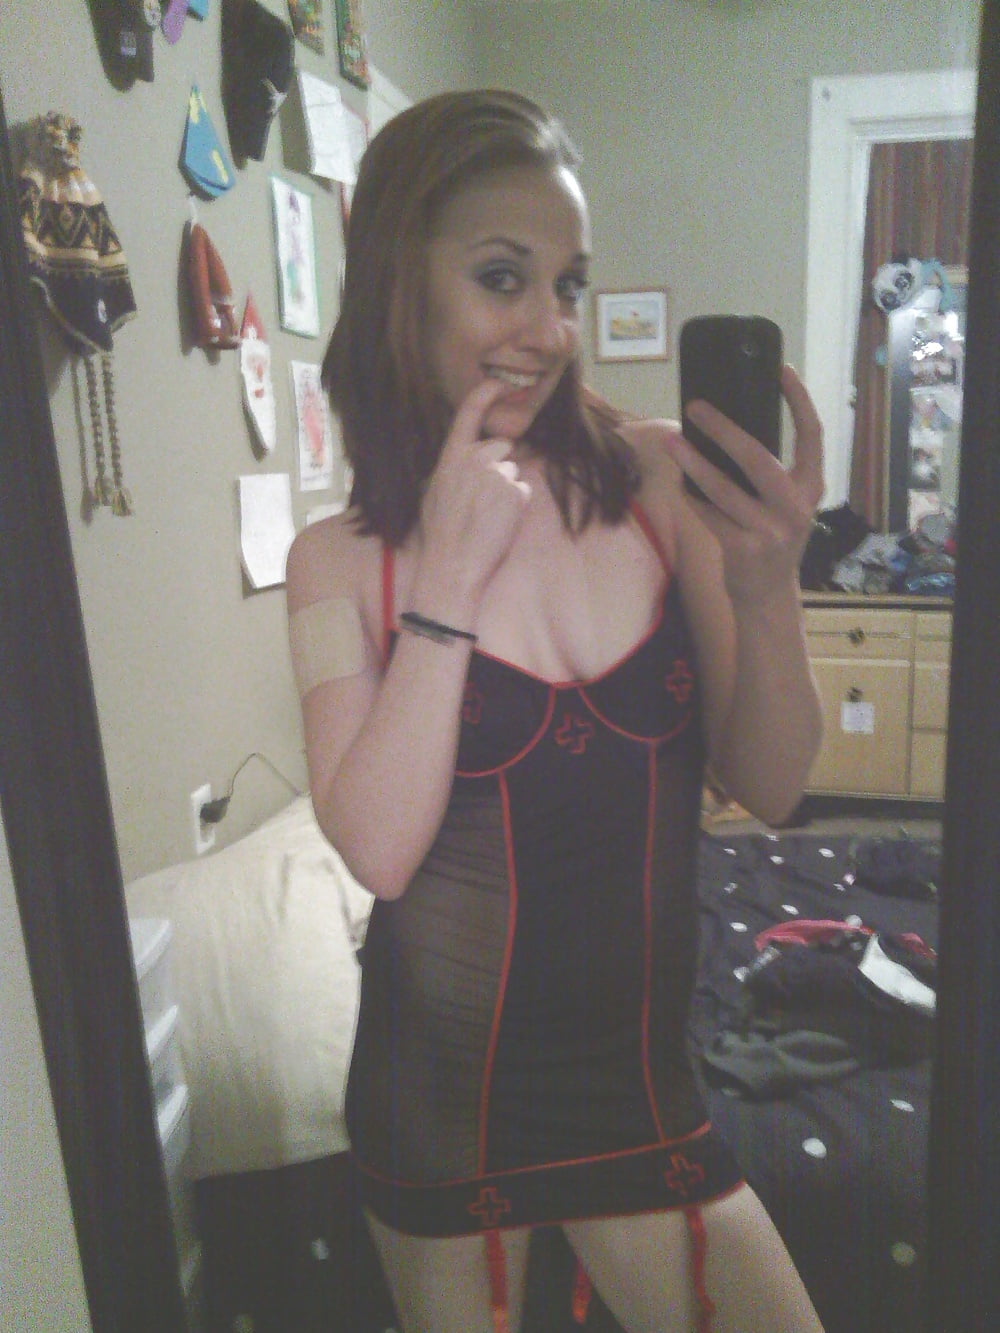 Web Slut Cassie Marie Chappell of Great Falls, MT exposed adult photos